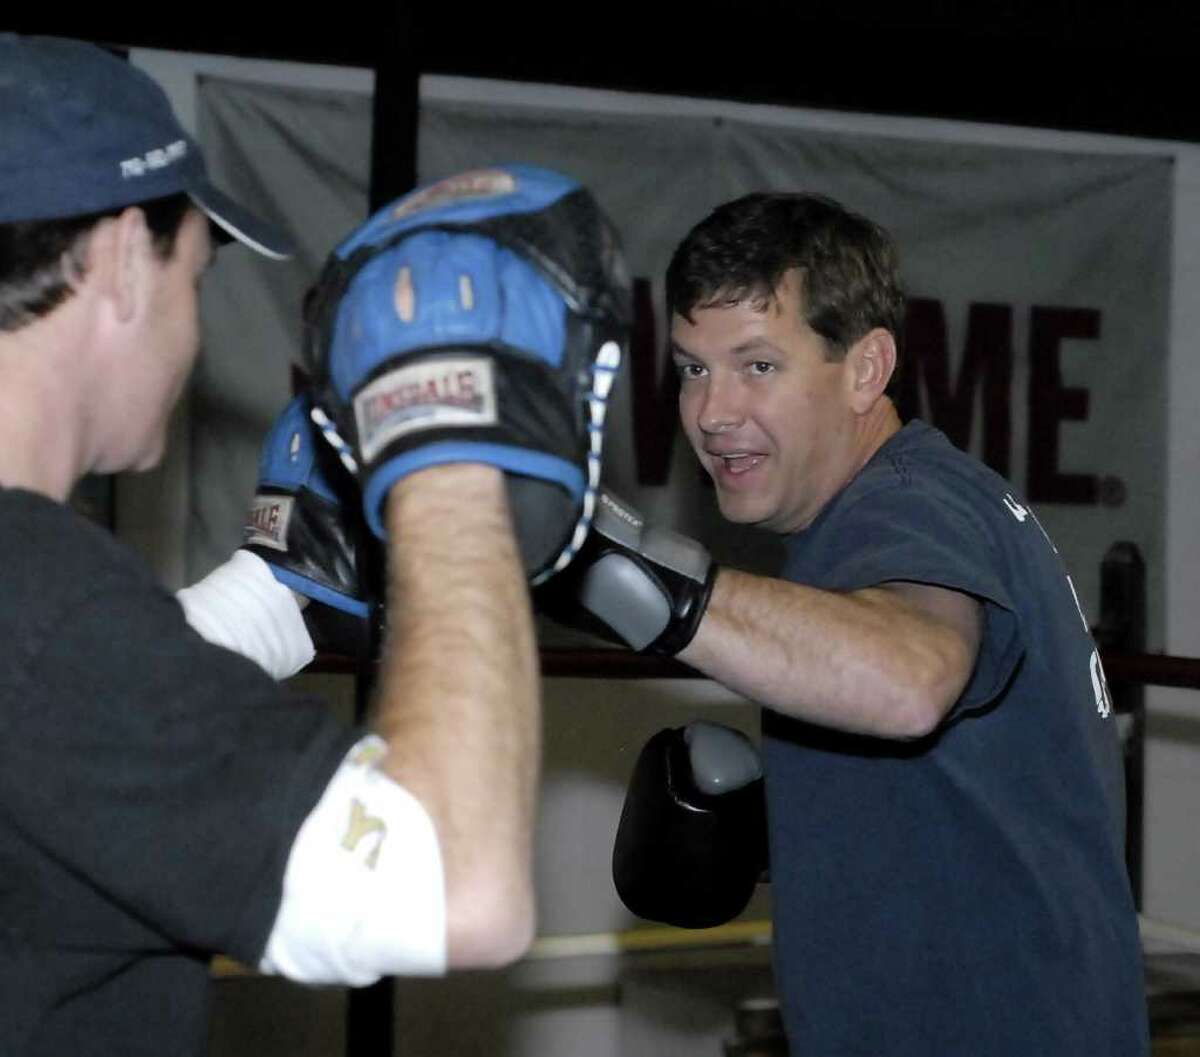 Episcopal minister Rev. Patrick Miller spars with co-owner Bobby Benton during his morning work outs at Main Boxing Gym Thursday 12/08/11. Photo by Tony Bullard.